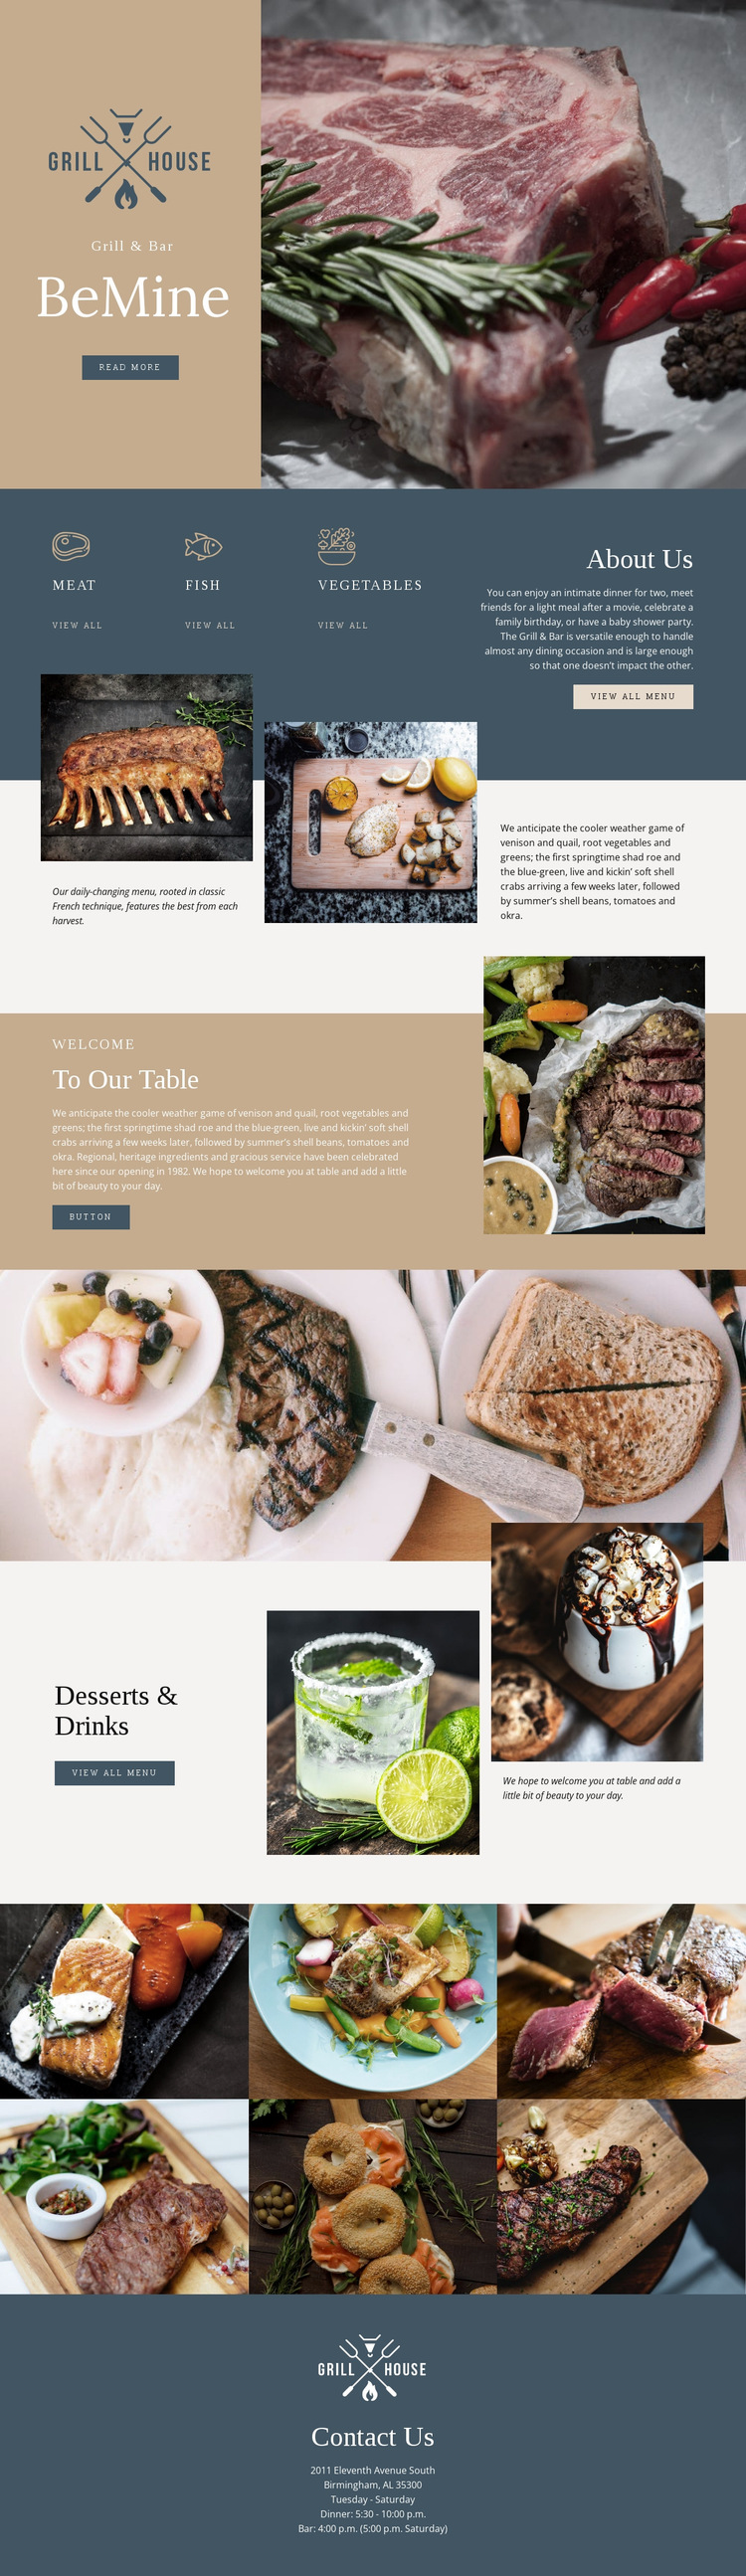 Finest grill house restaurant HTML5 Template